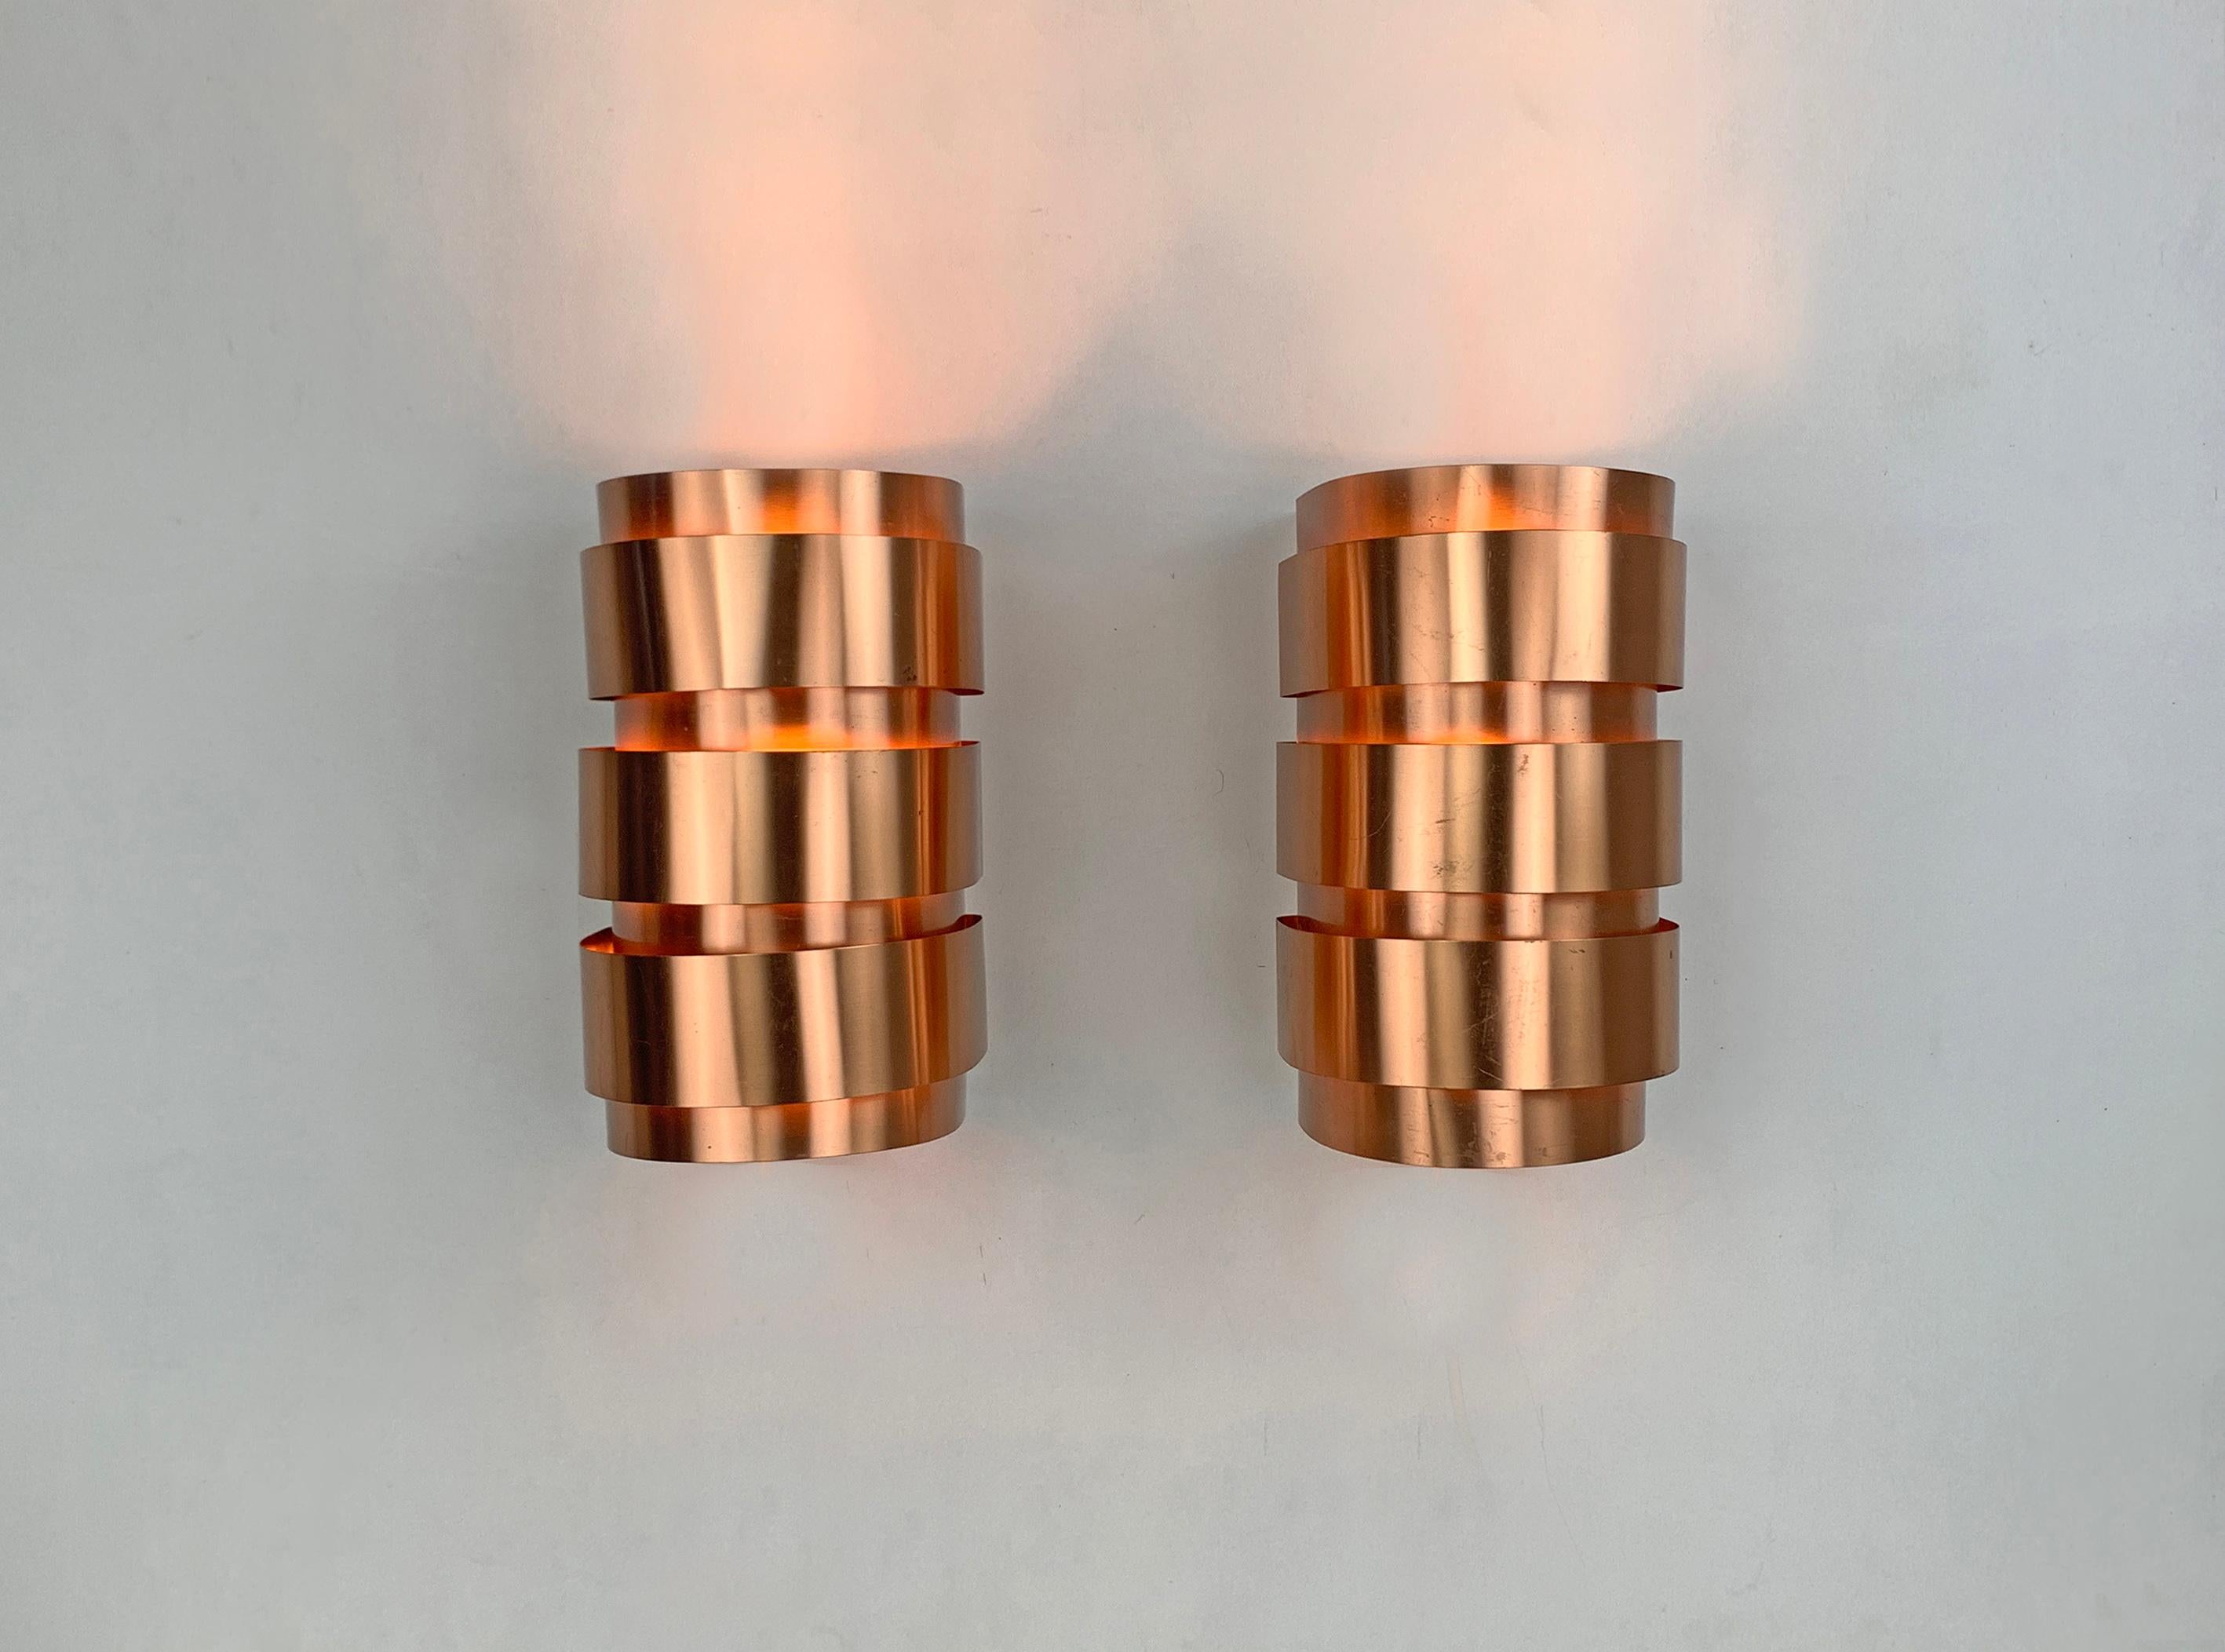 Pair of Scandinavian V-155 wall-lamps in copper finish.
Design by Hans-Agne Jakobsson.
Manufactured by AB Markaryd in Sweden, both retain their original sticker.

Very nice, iconic model. Gives great light effects on the wall.
Patina conform to